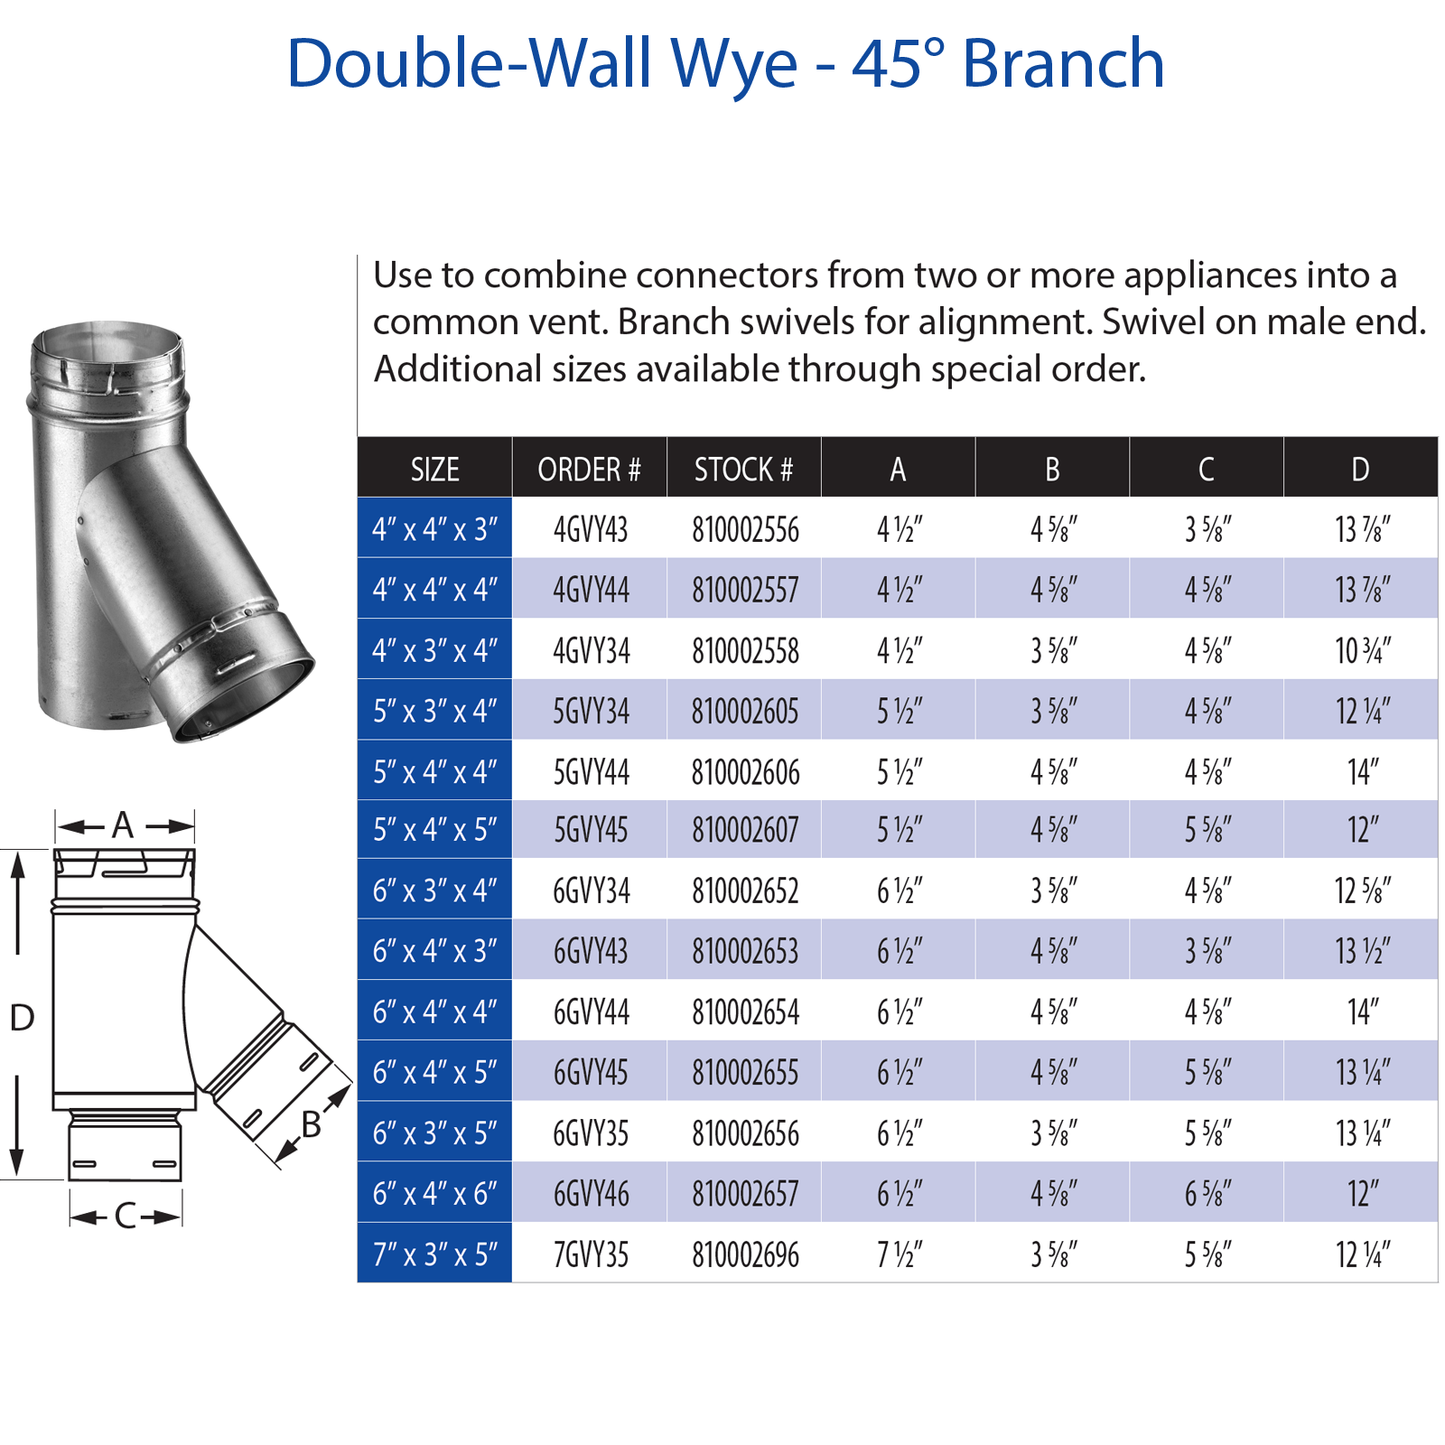 DuraVent Type B 6" x 3" x 5" Double-Wall WYE - 45 Degree Br | 6GVY35